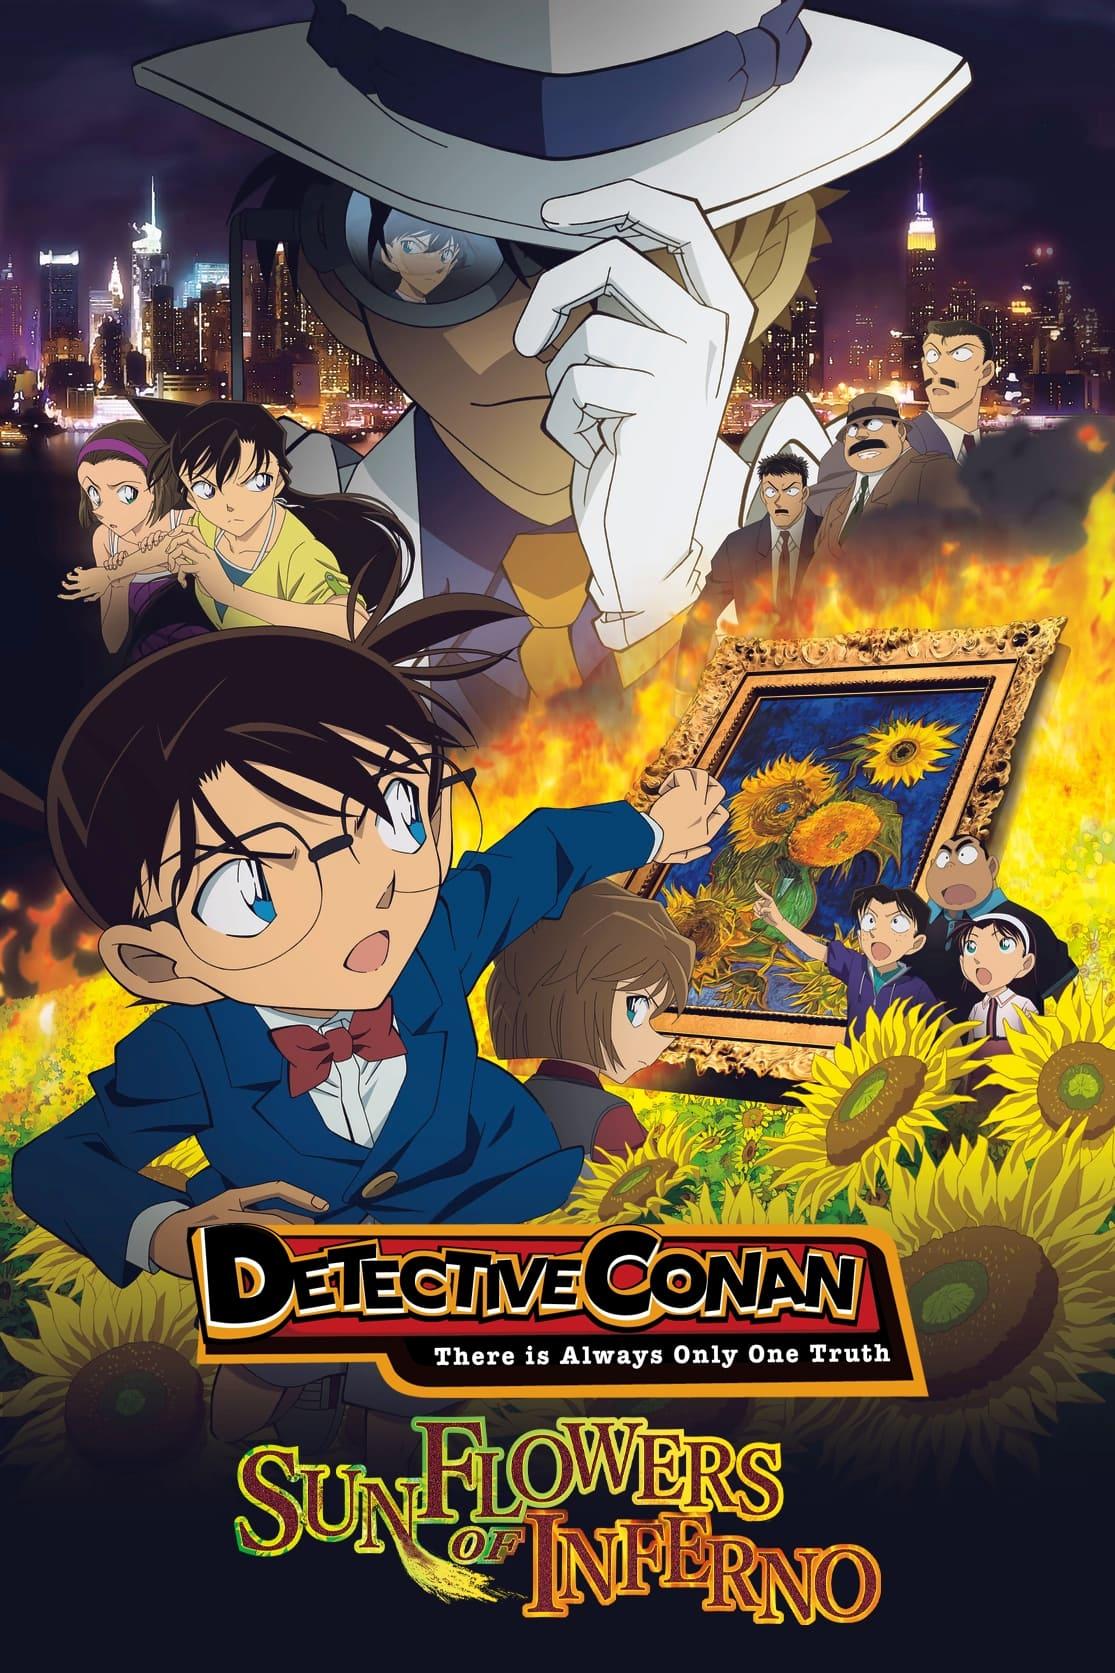 Detective Conan: Sunflowers of Inferno poster